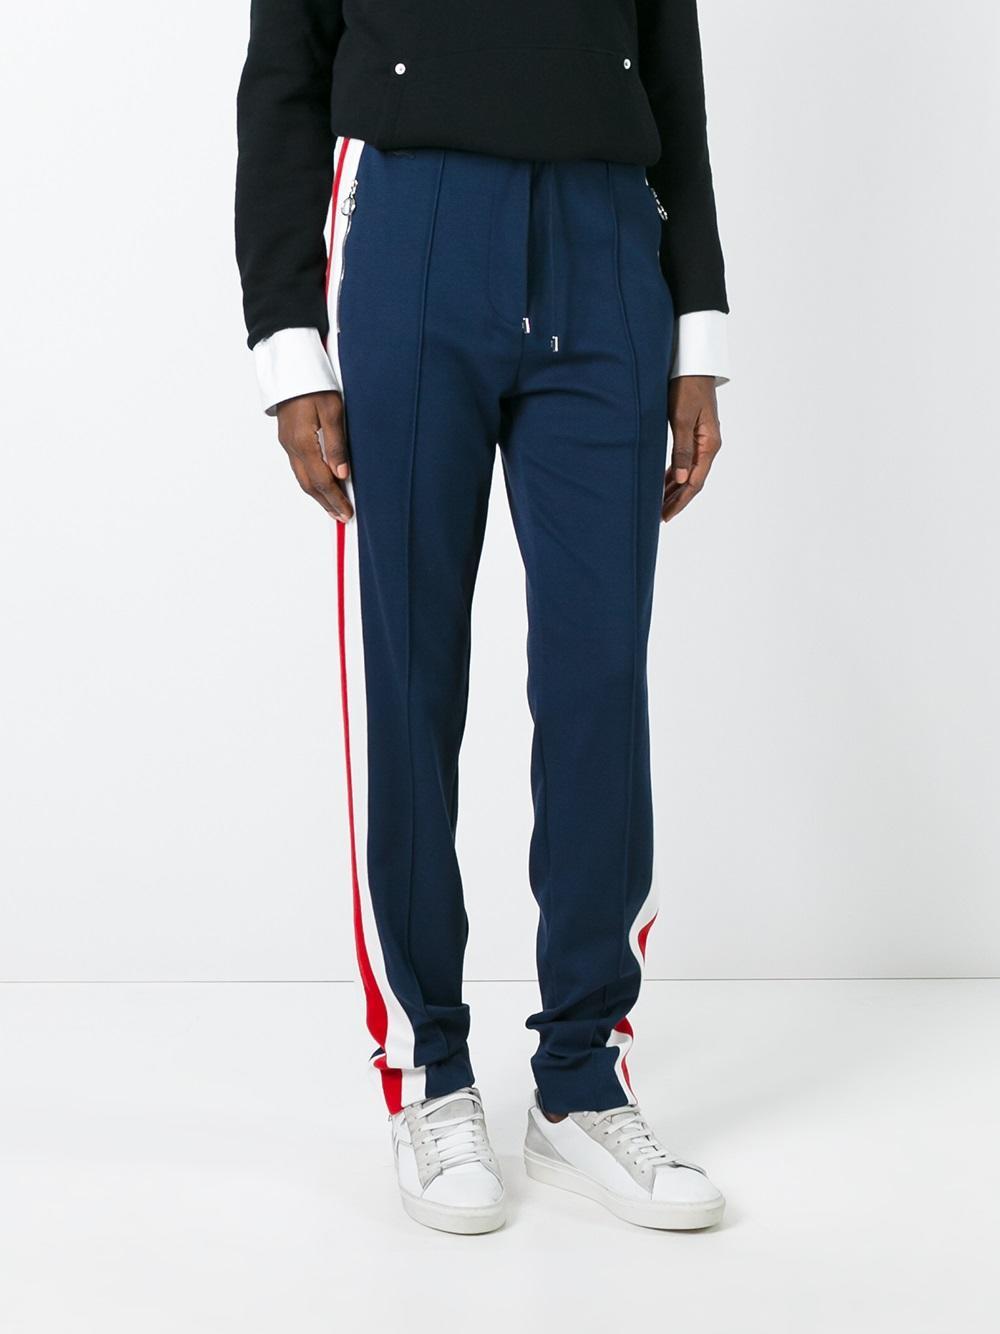 Lyst - Lacoste Straight-leg Track Pants in Blue